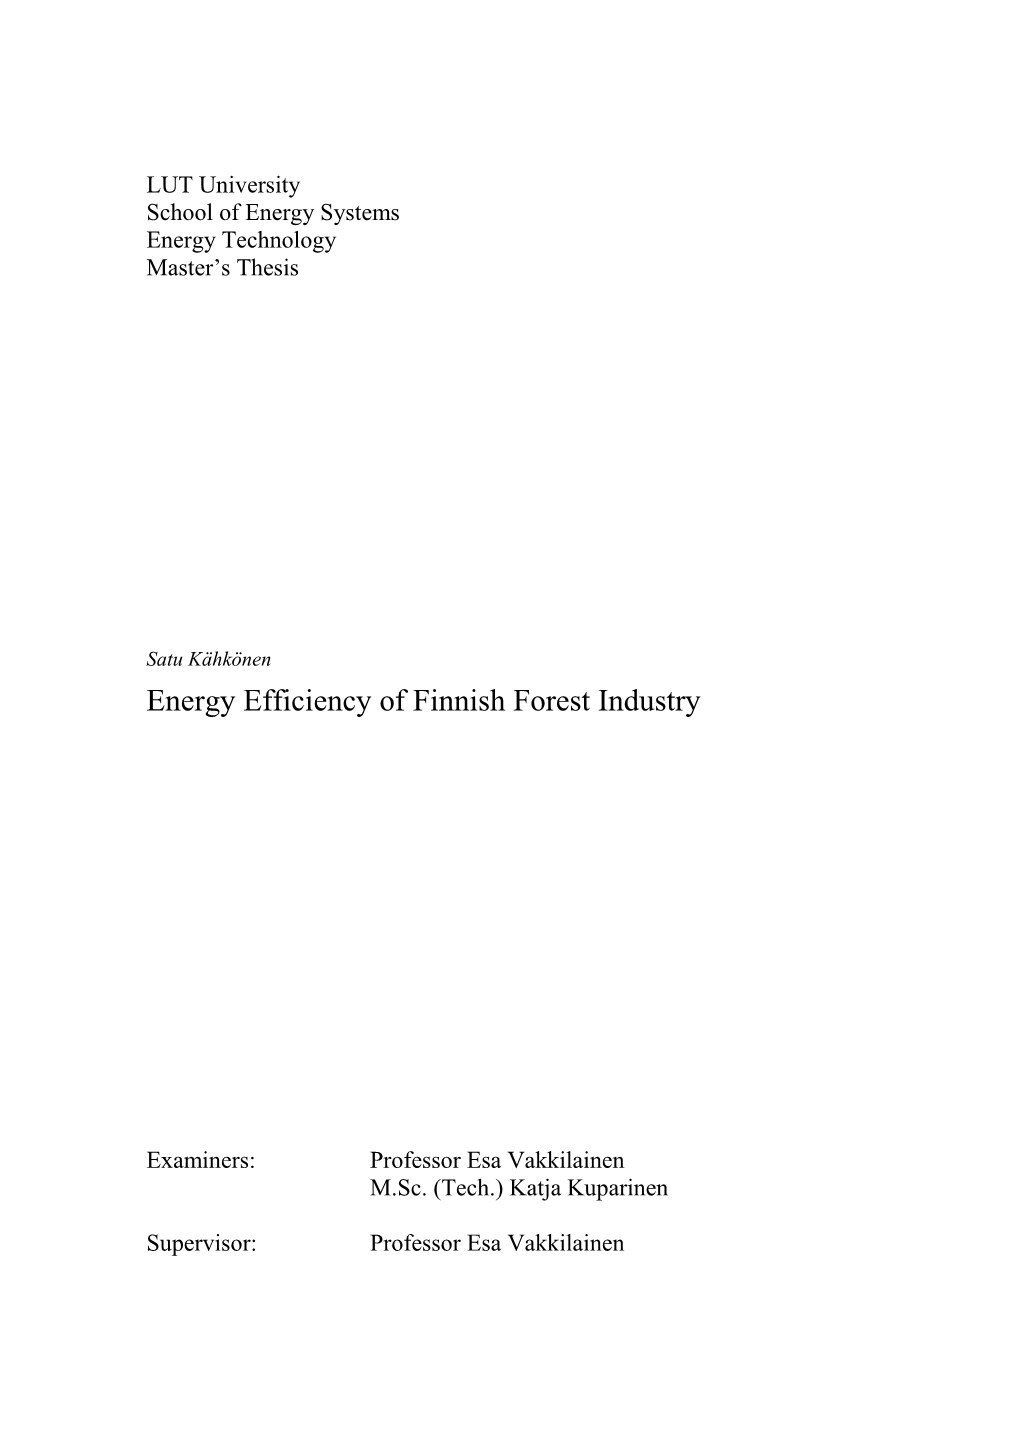 Energy Efficiency of Finnish Forest Industry